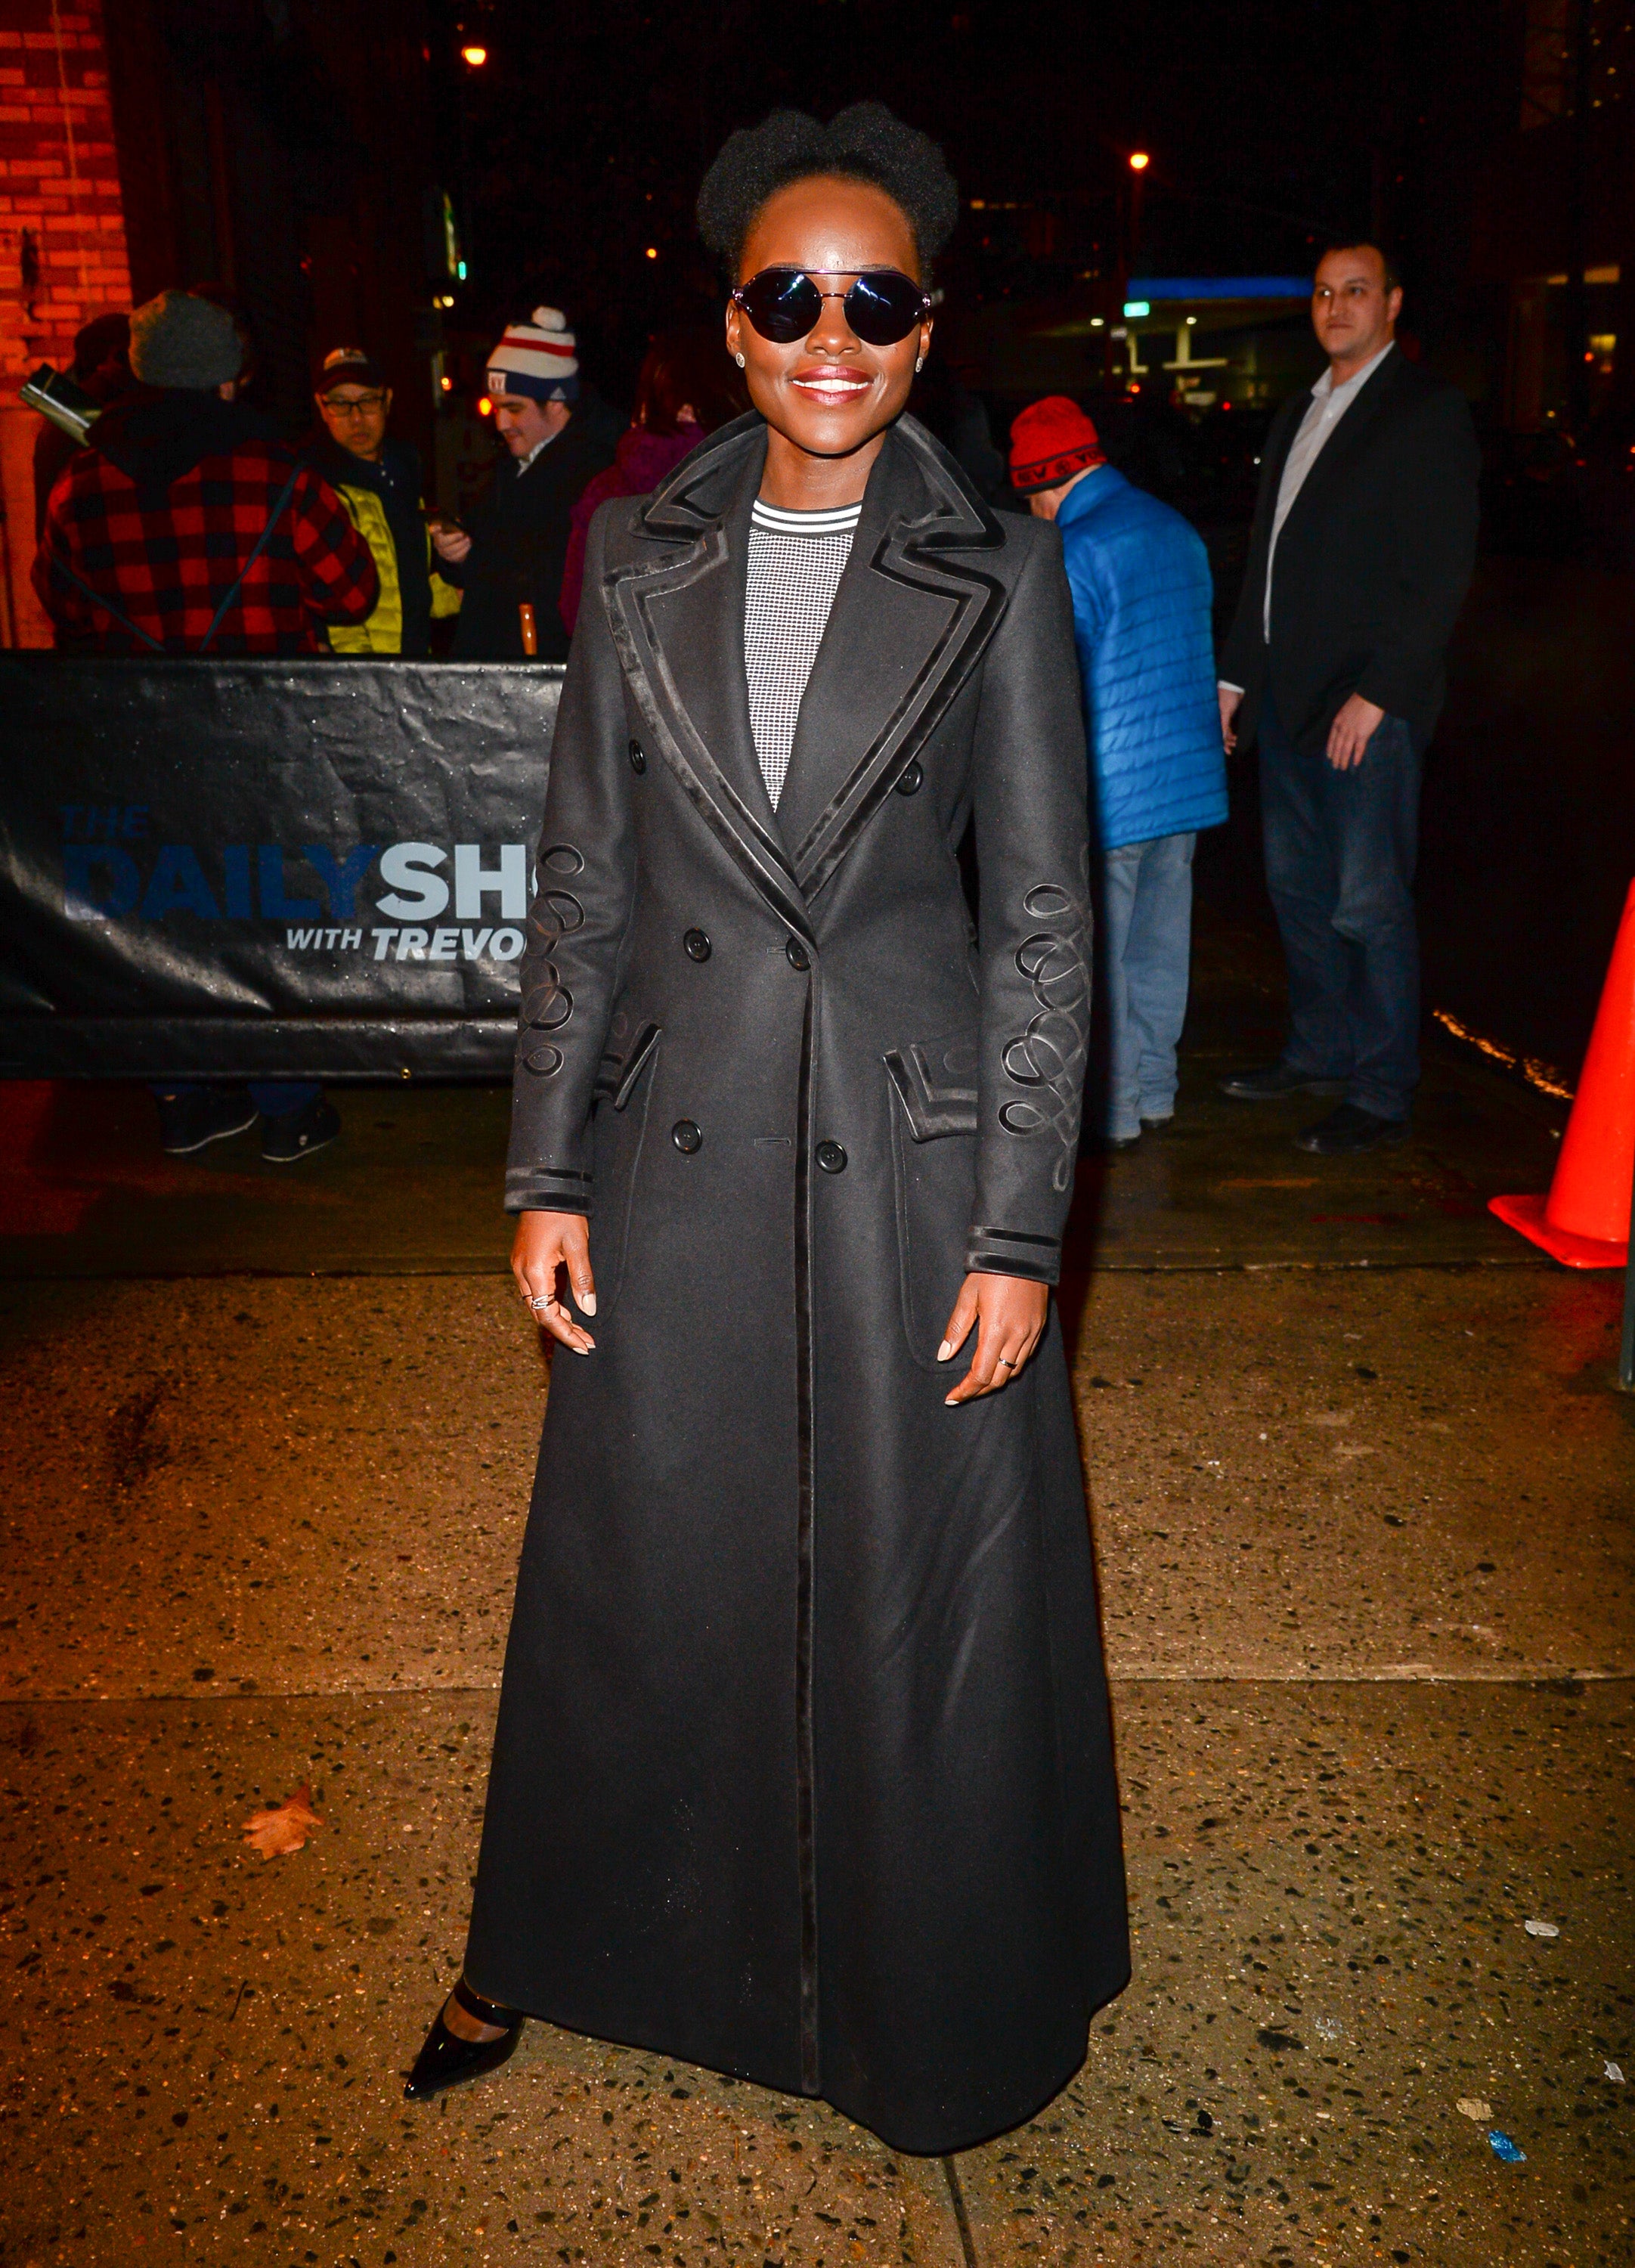 Danai Gurira, Ava DuVernay, Angela Bassett and More Celebs Out and About
